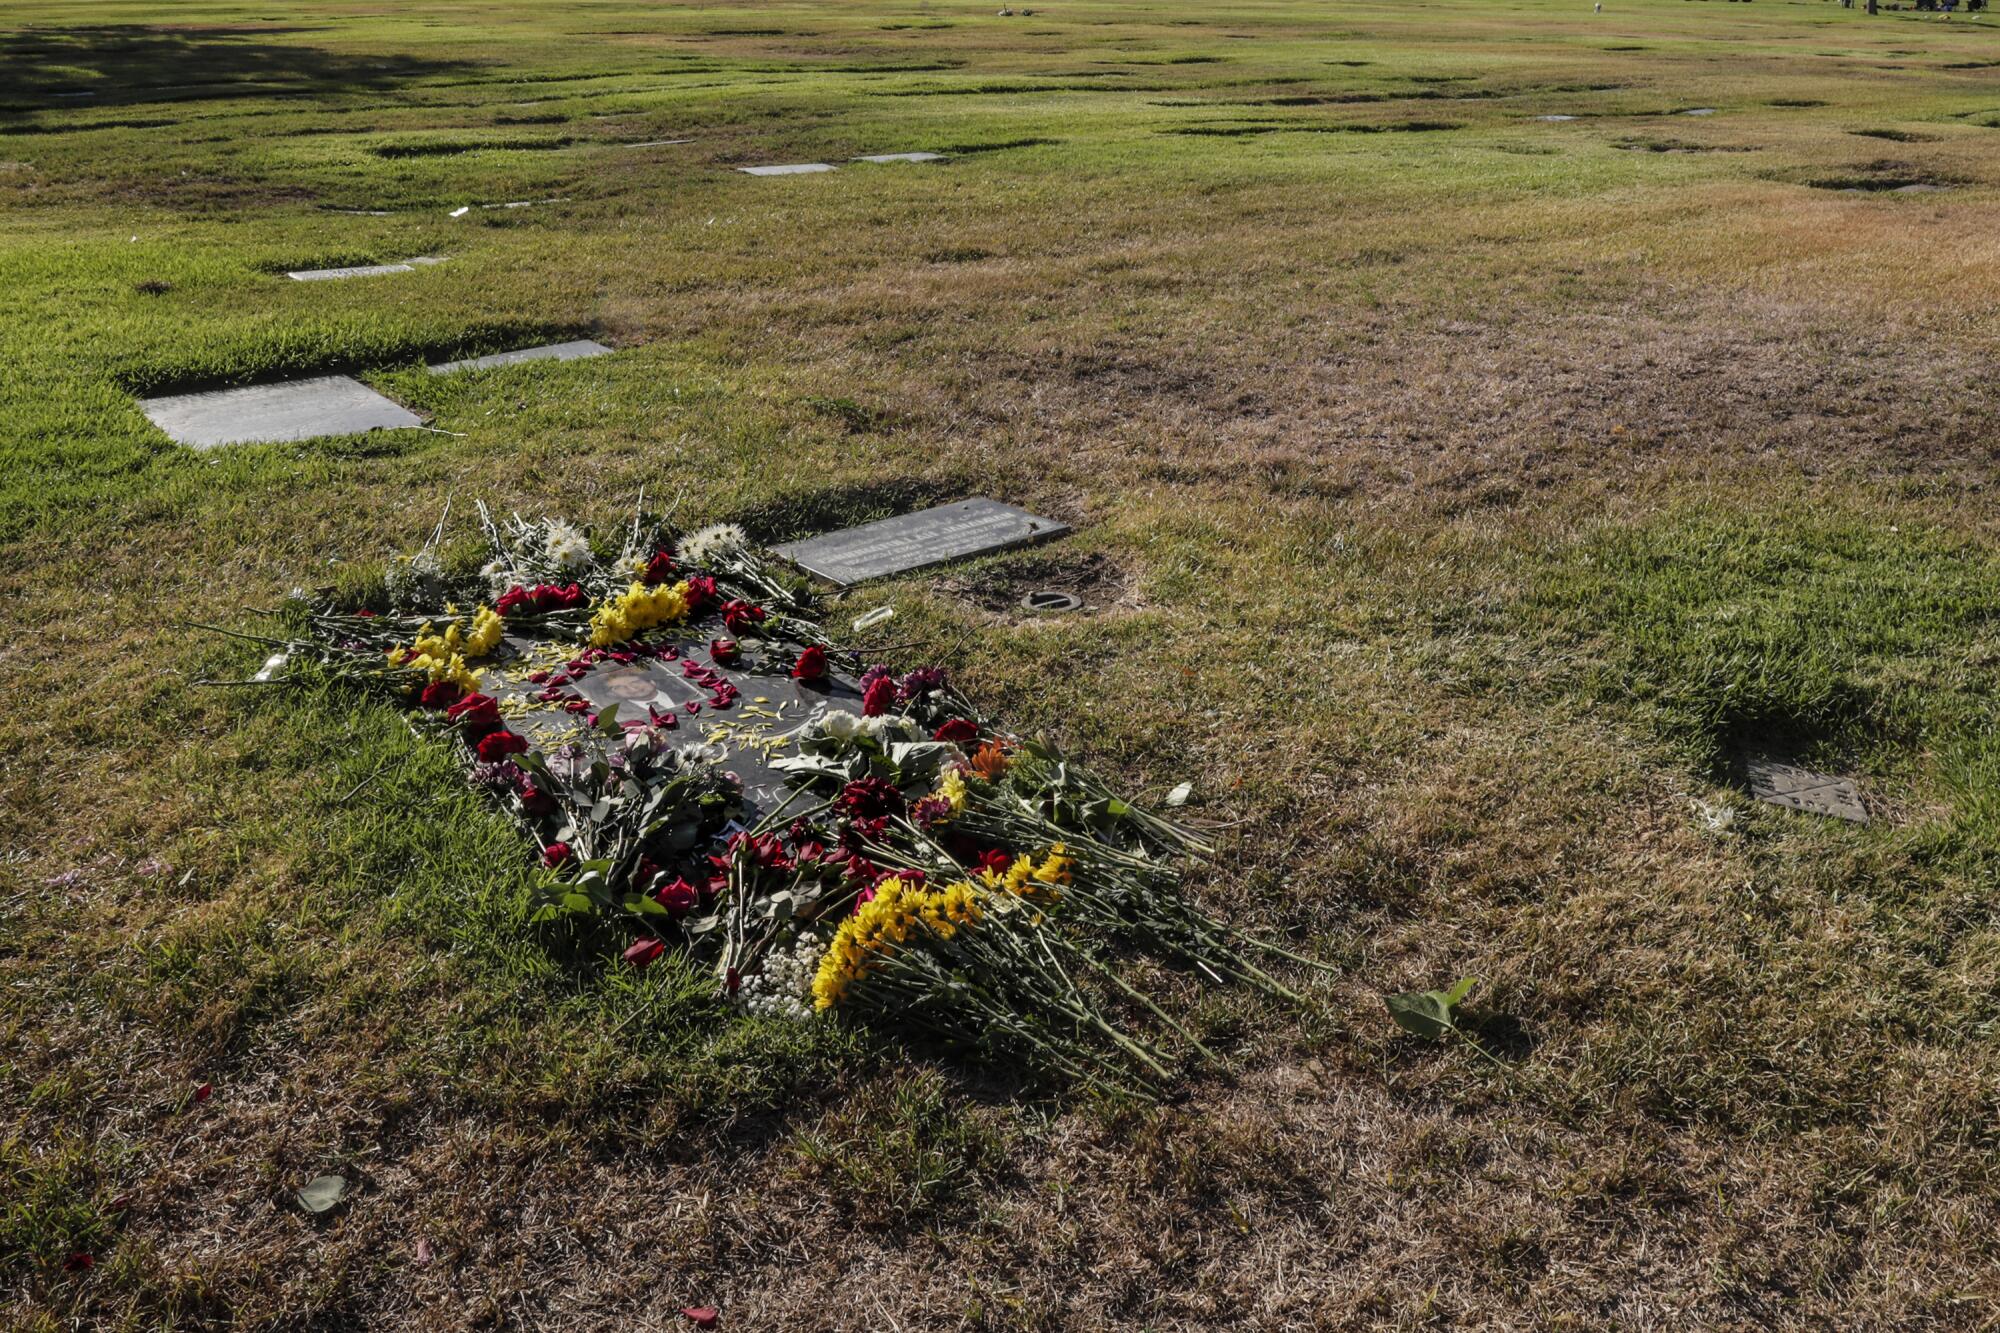 Flowers are arranged on a gravestone in the grass